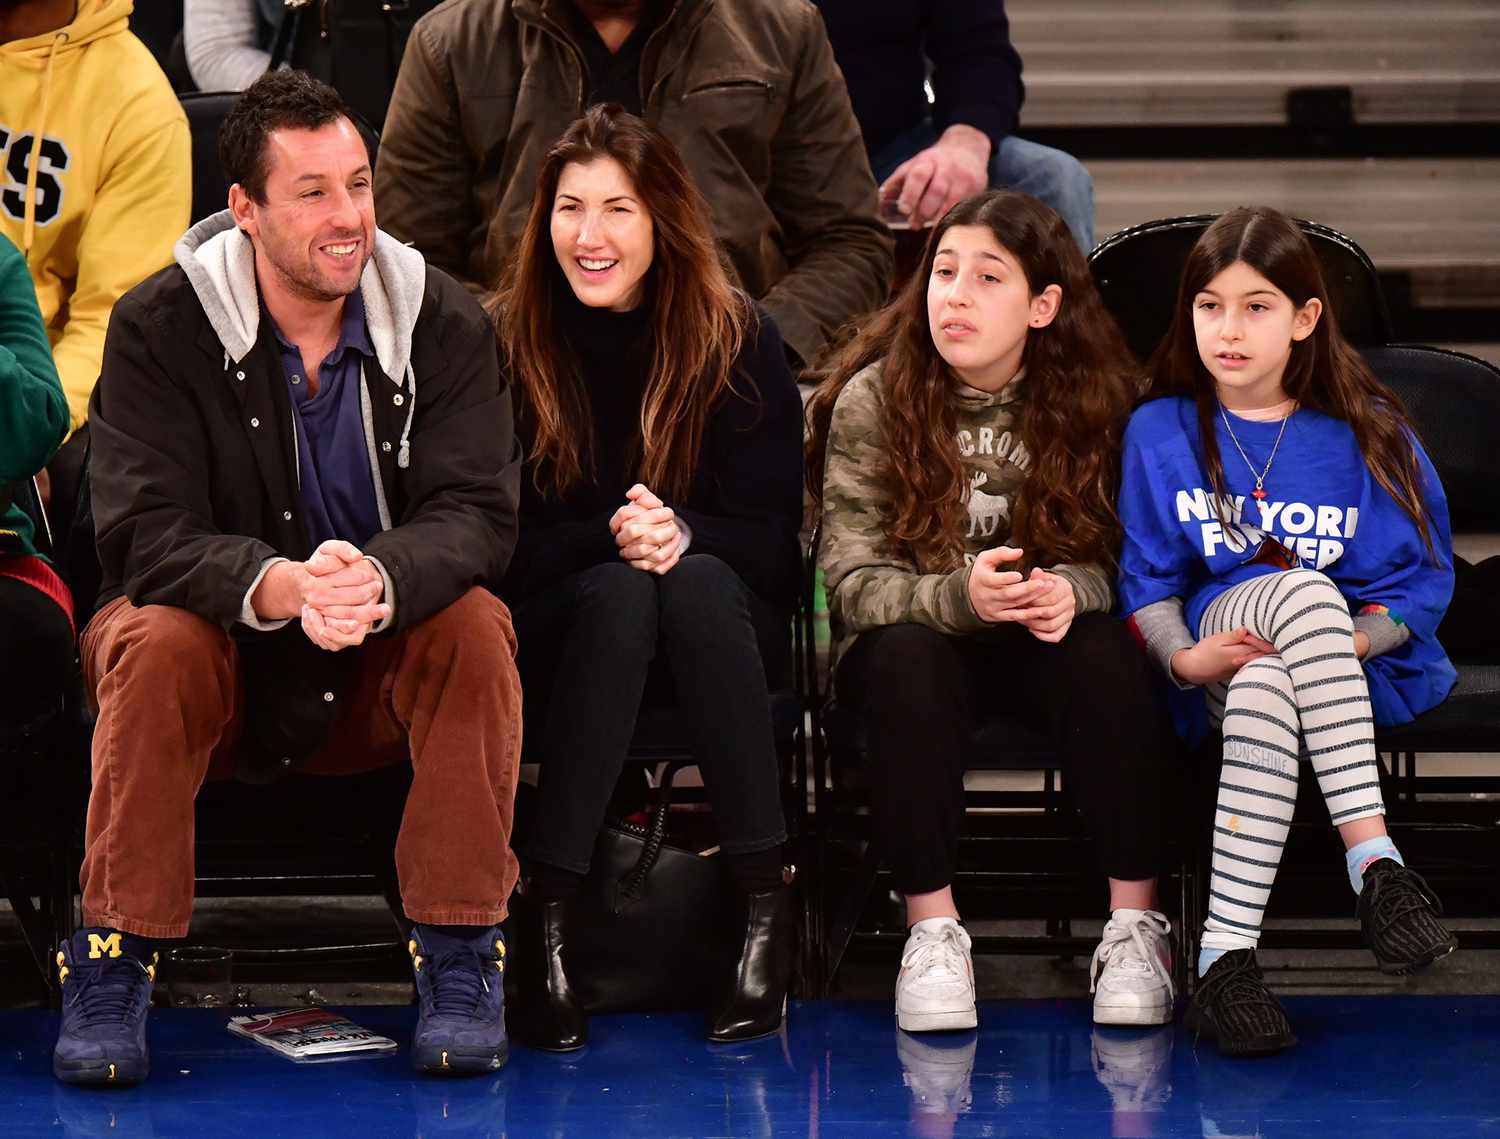 Adam Sandler's Wife And Kids: Meet The Famous Actor And Comedian's Wife, Jackie Sandler And Two Daughters, Sunny And Sadie Sandler